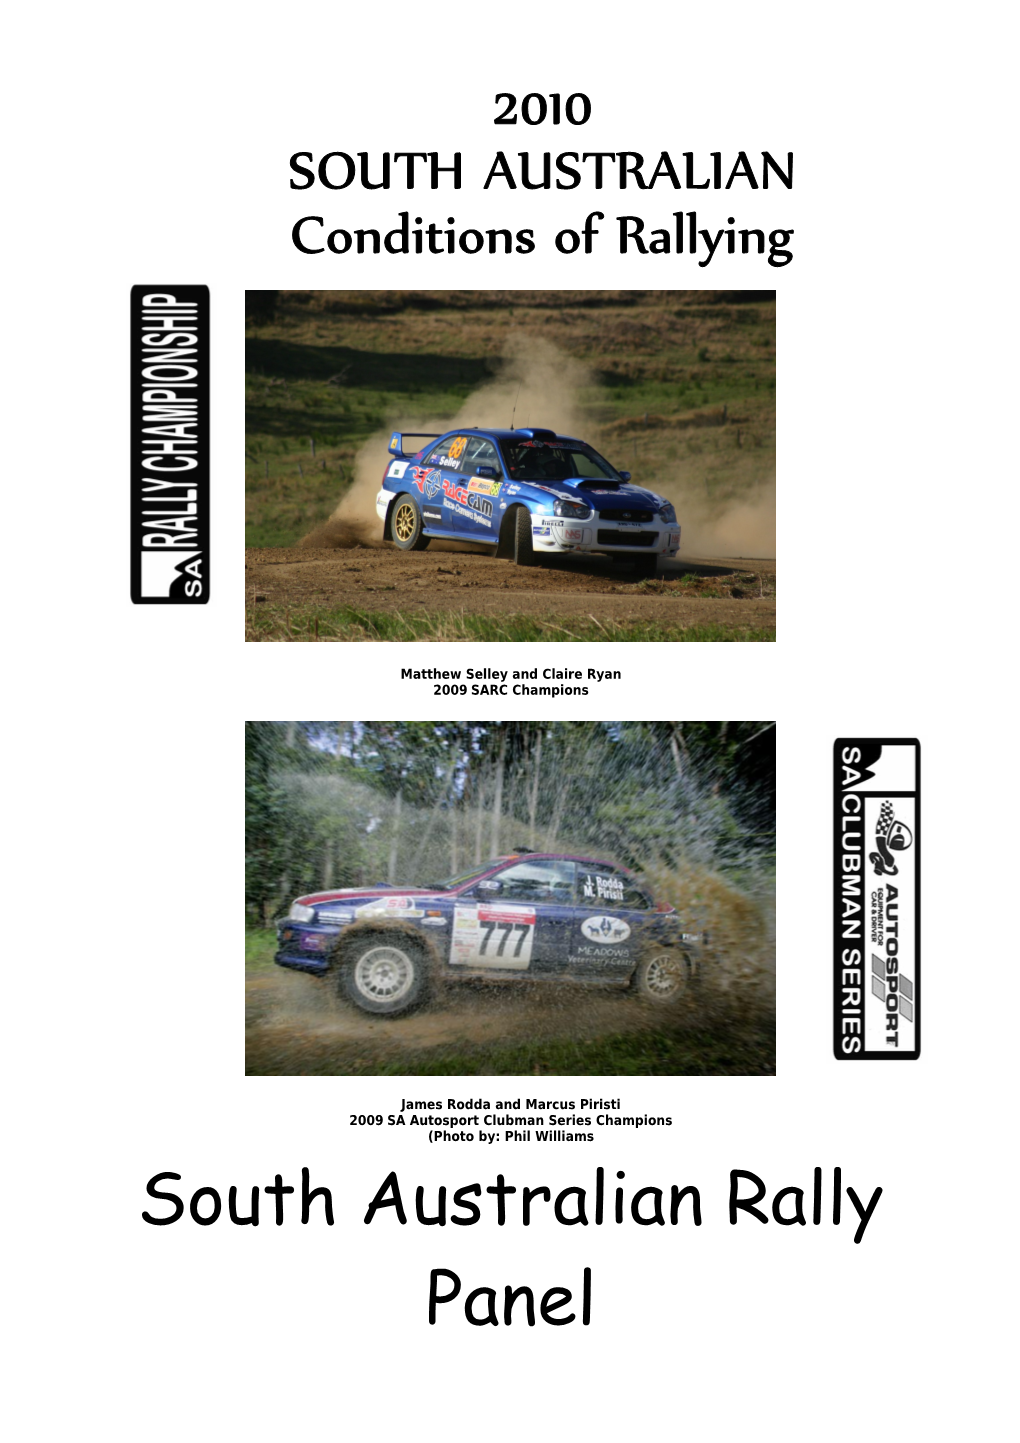 South Australian Conditions of Rallying